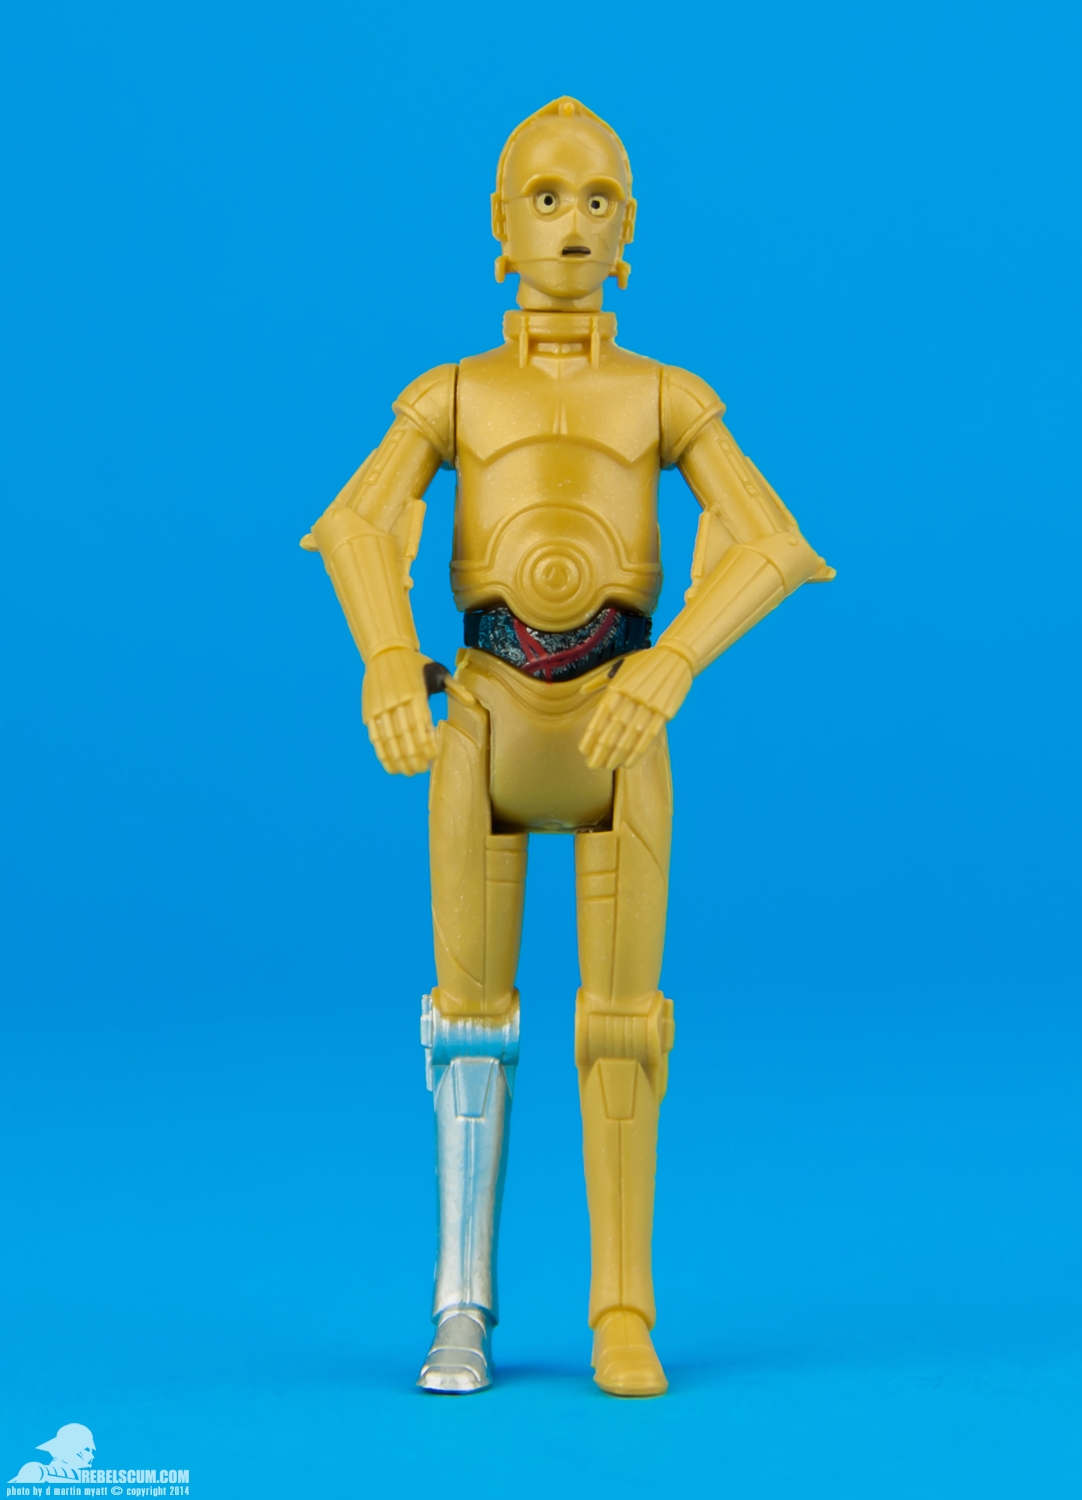 MS02-Rebels-Mission-Series-C-3PO-and-R2-D2-001.jpg